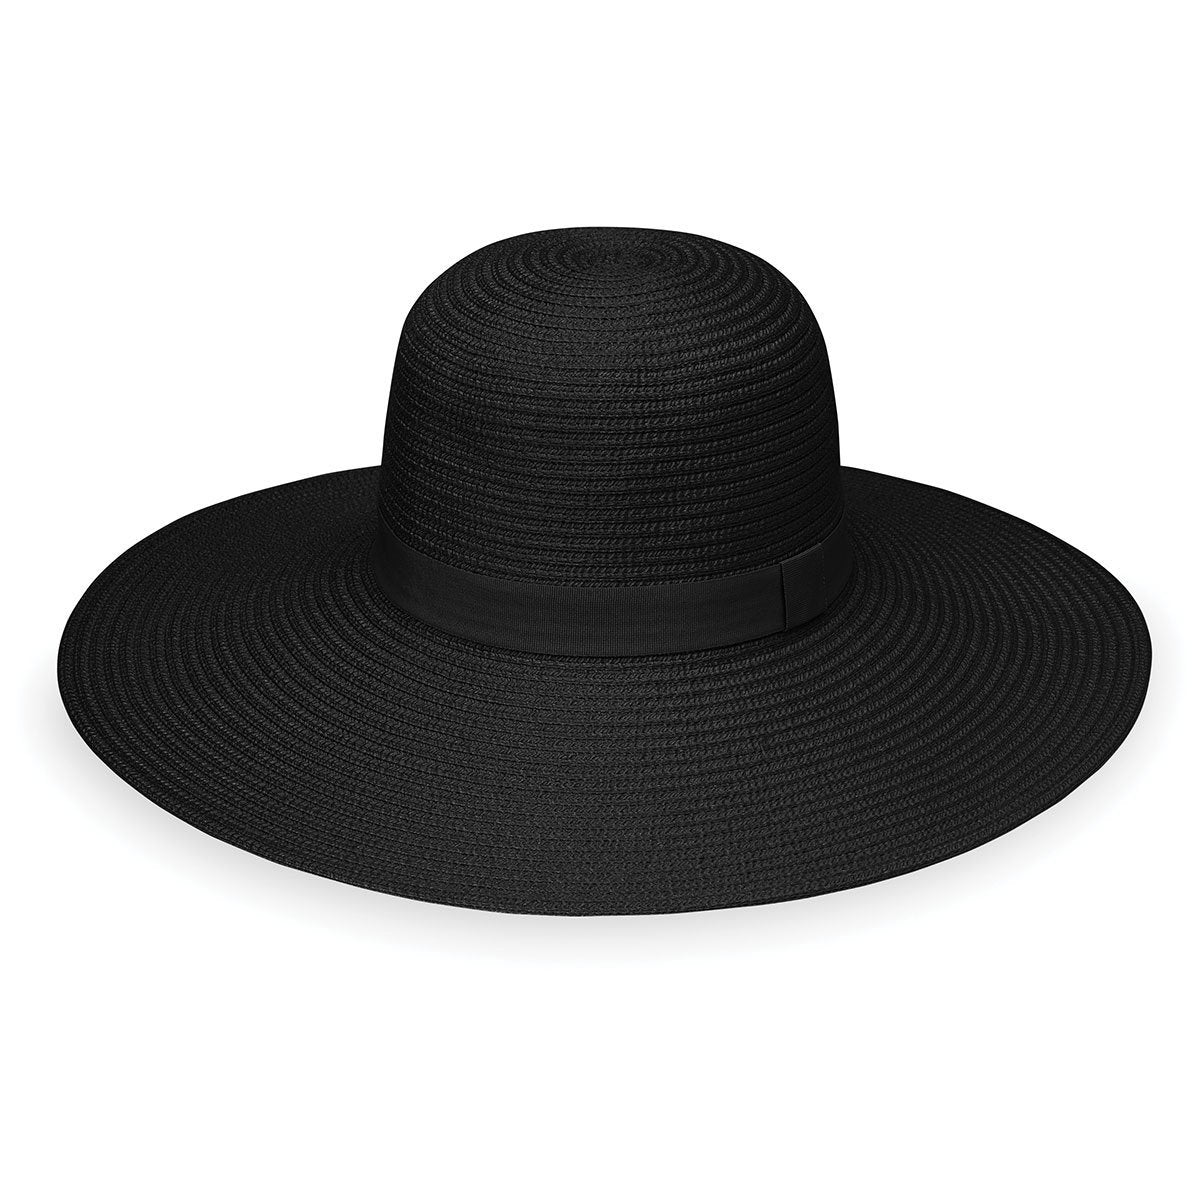 Featuring The Aria Women's Wide Brim Packable UPF Sun Hat in Black from Wallaroo